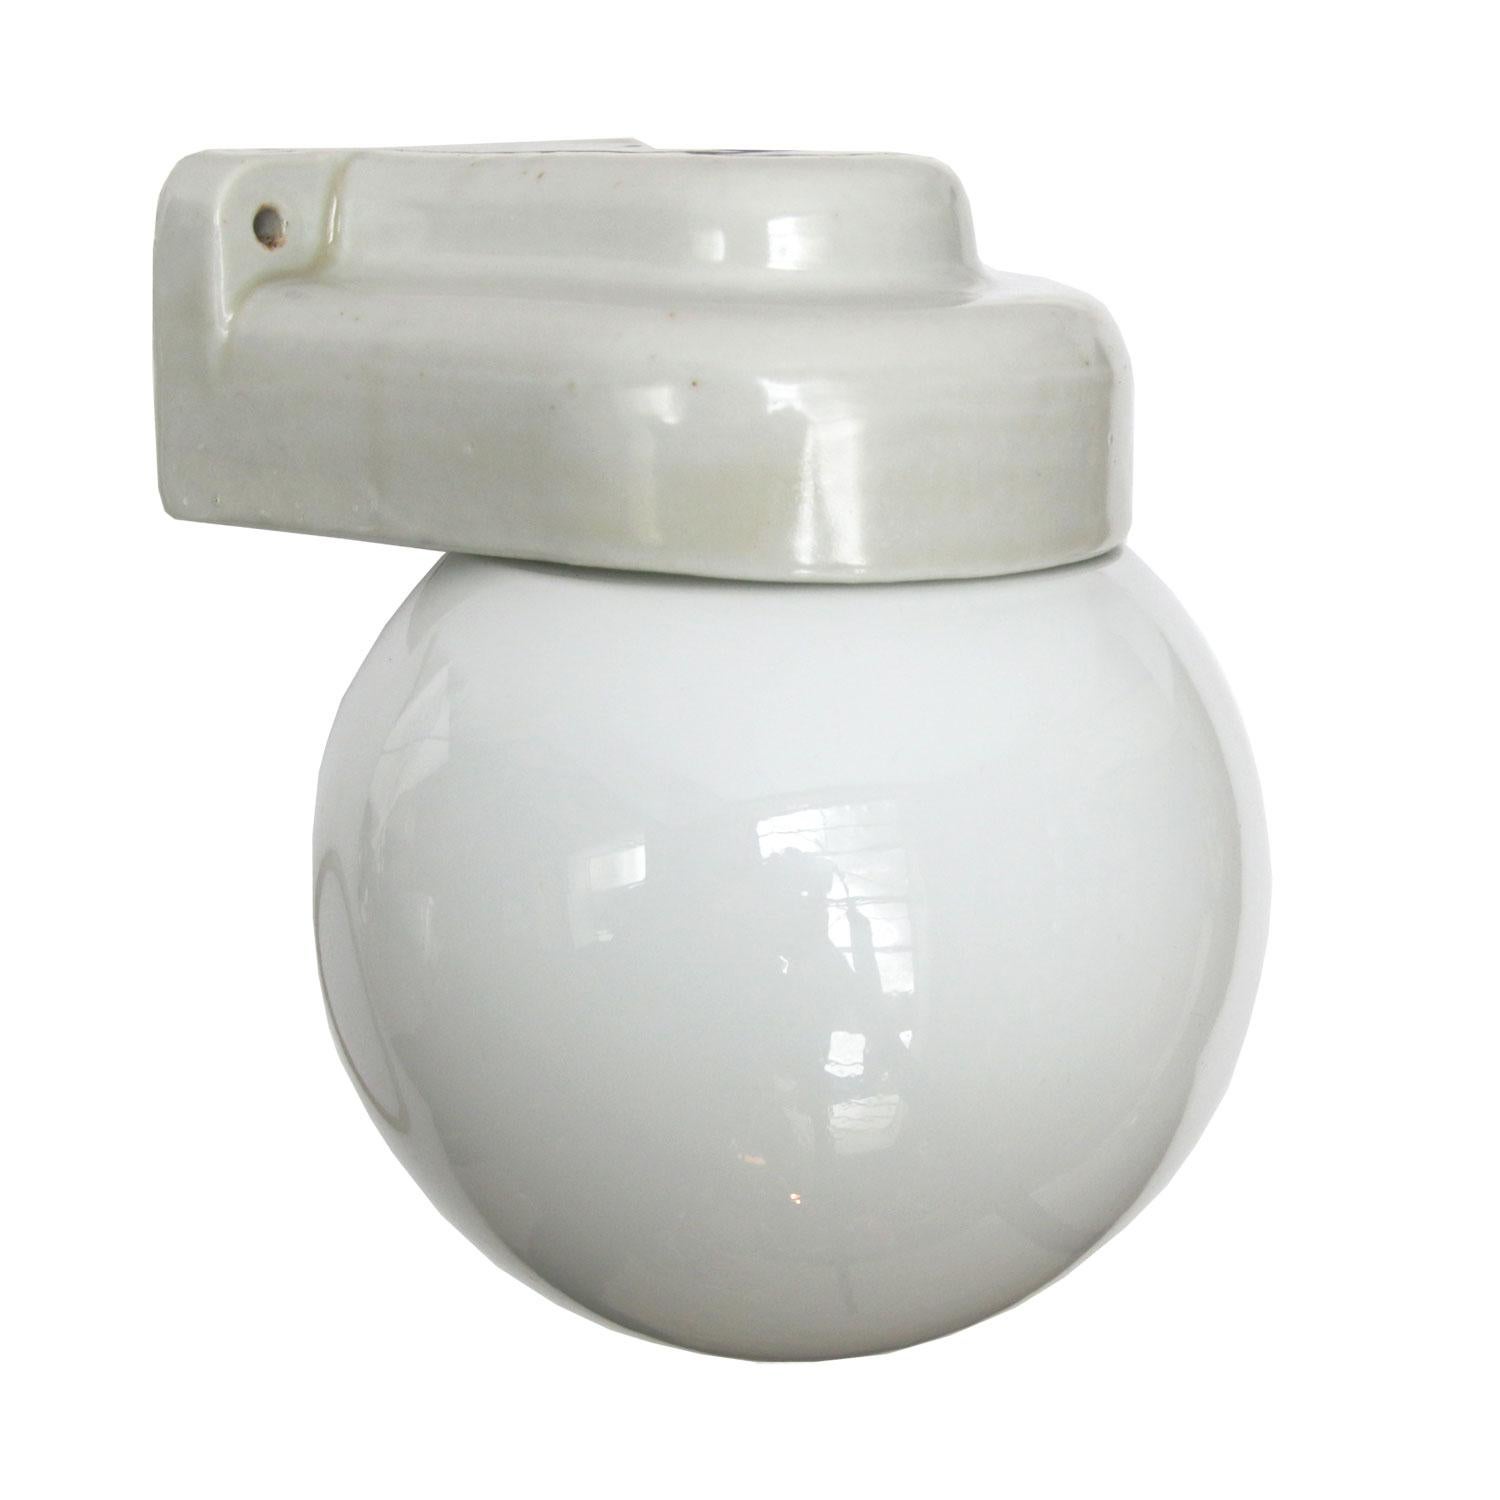 Industrial wall lamp or scone. White porcelain. White opaline glass.
Two conductors. No ground.
Suitable for 110 volt USA

Weight: 1.5 kg / 3.3 lb

Priced per individual item. All lamps have been made suitable by international standards for